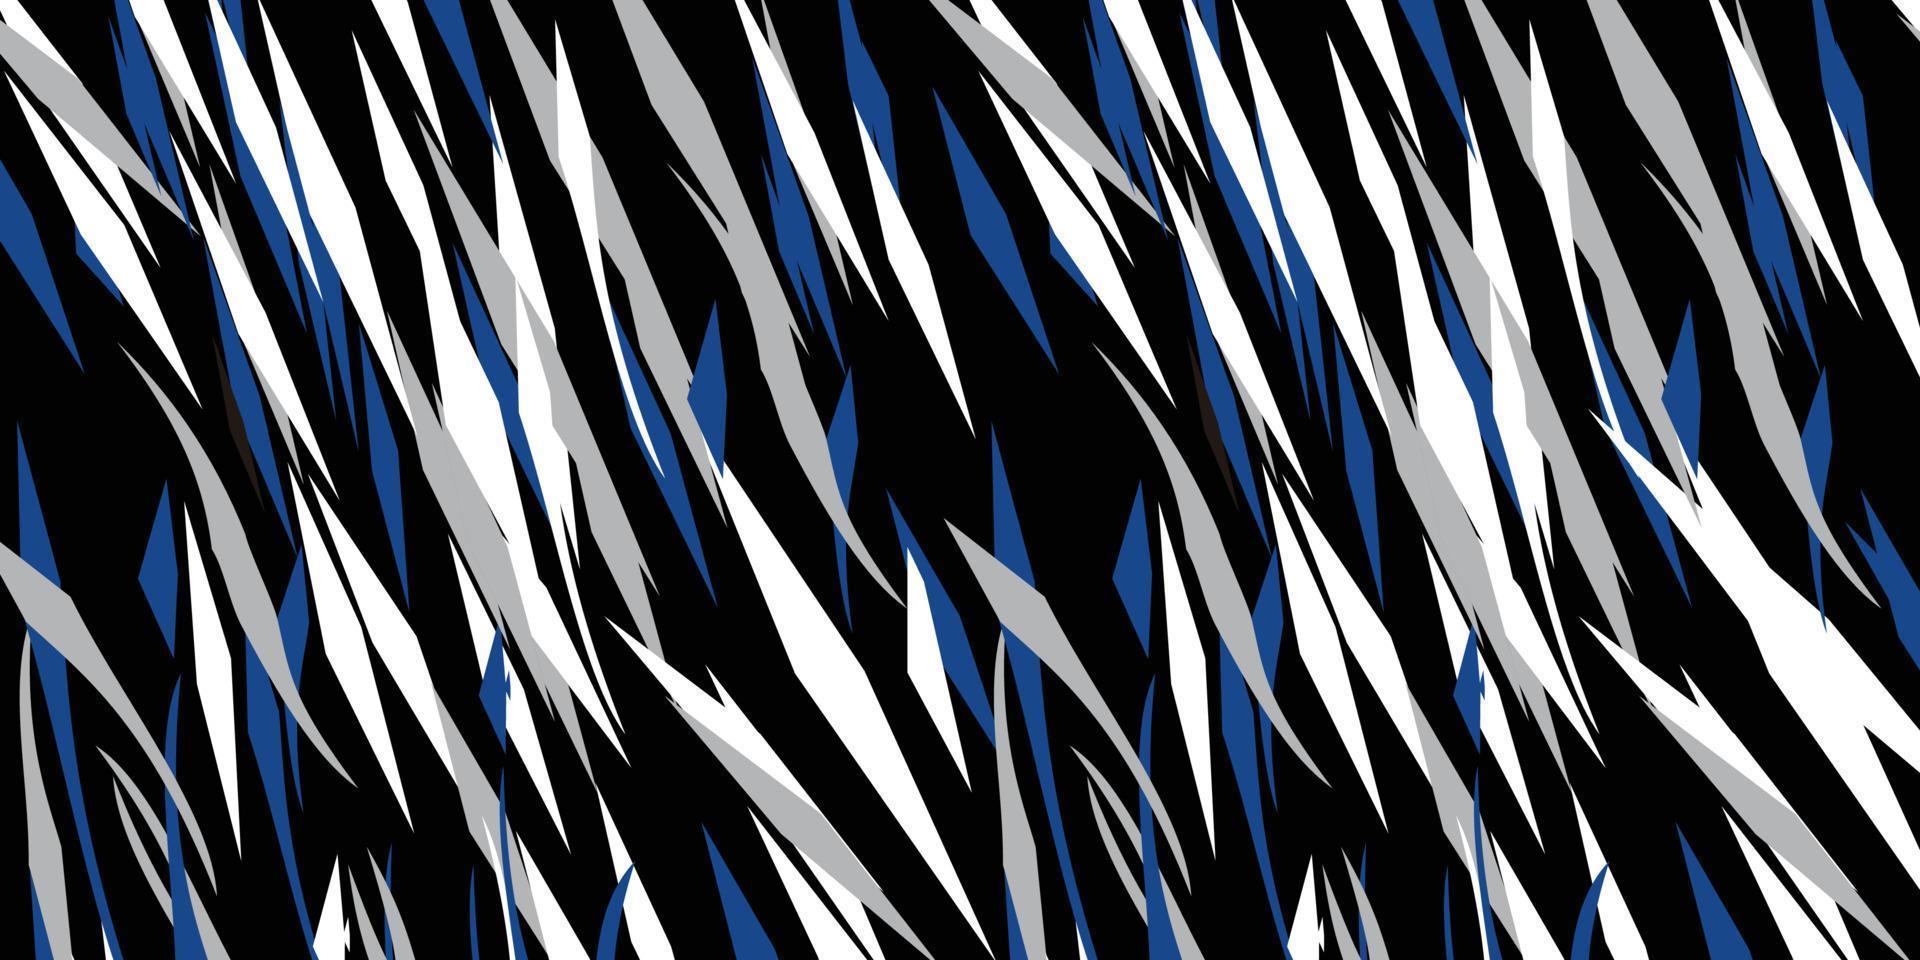 Abstract Texture with Stripes Motif blue, gray, white, and black background for Fabric, Cloth, Paper Trendy Vector Background.